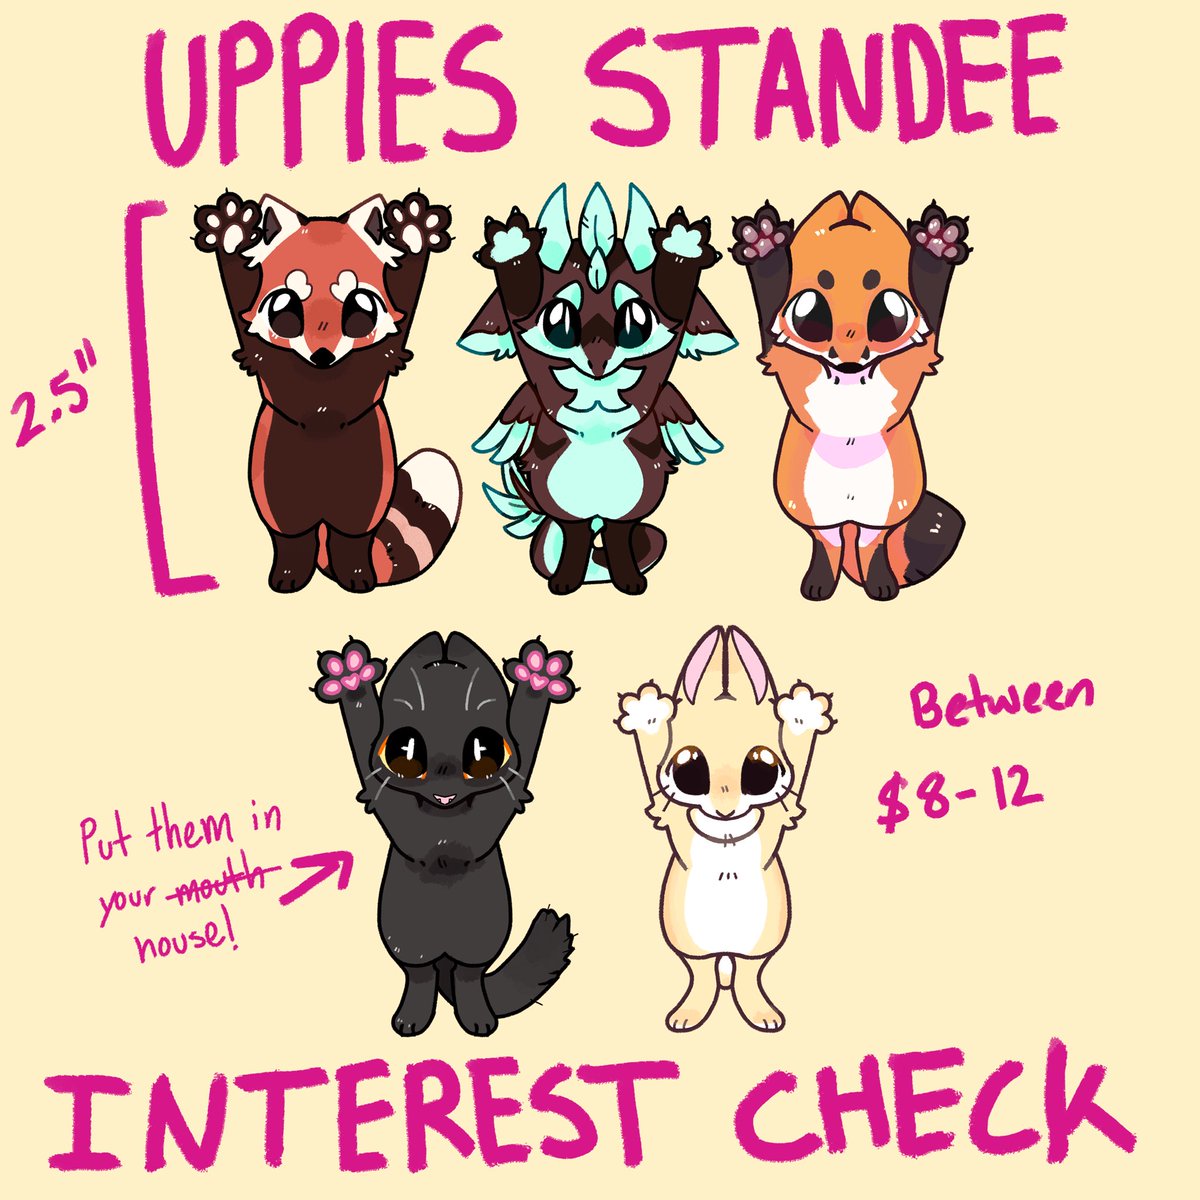 Chat how are we feeling some mini uppies standees??
I’d love to make more animals if this series is popular enough